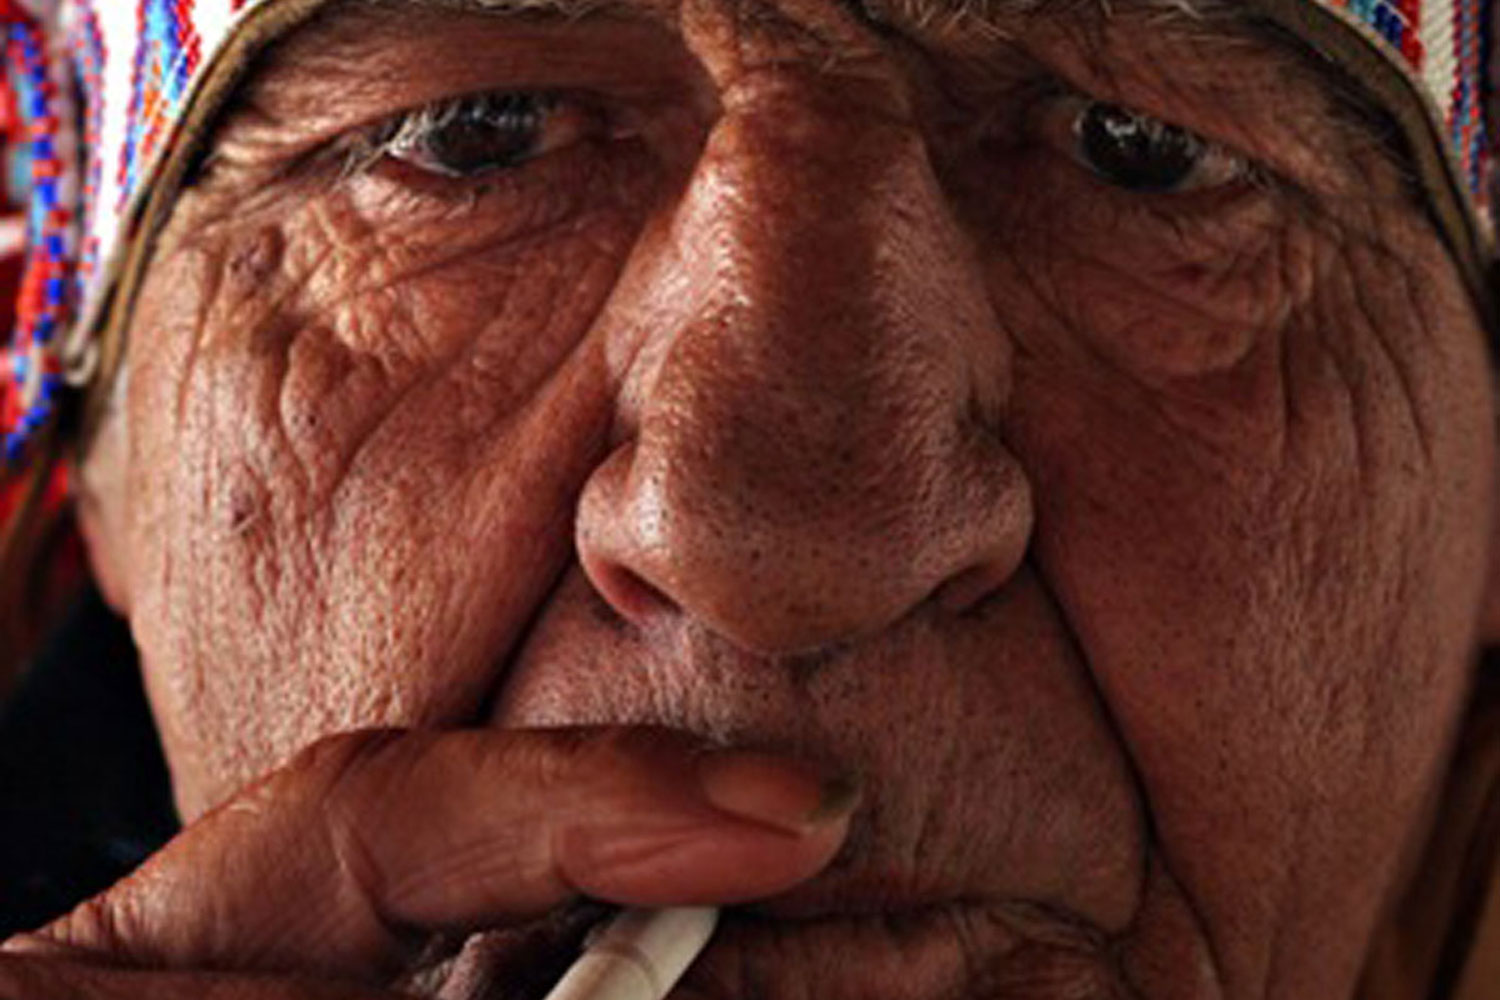 A close up of a wrinkled man smoking a cigarette